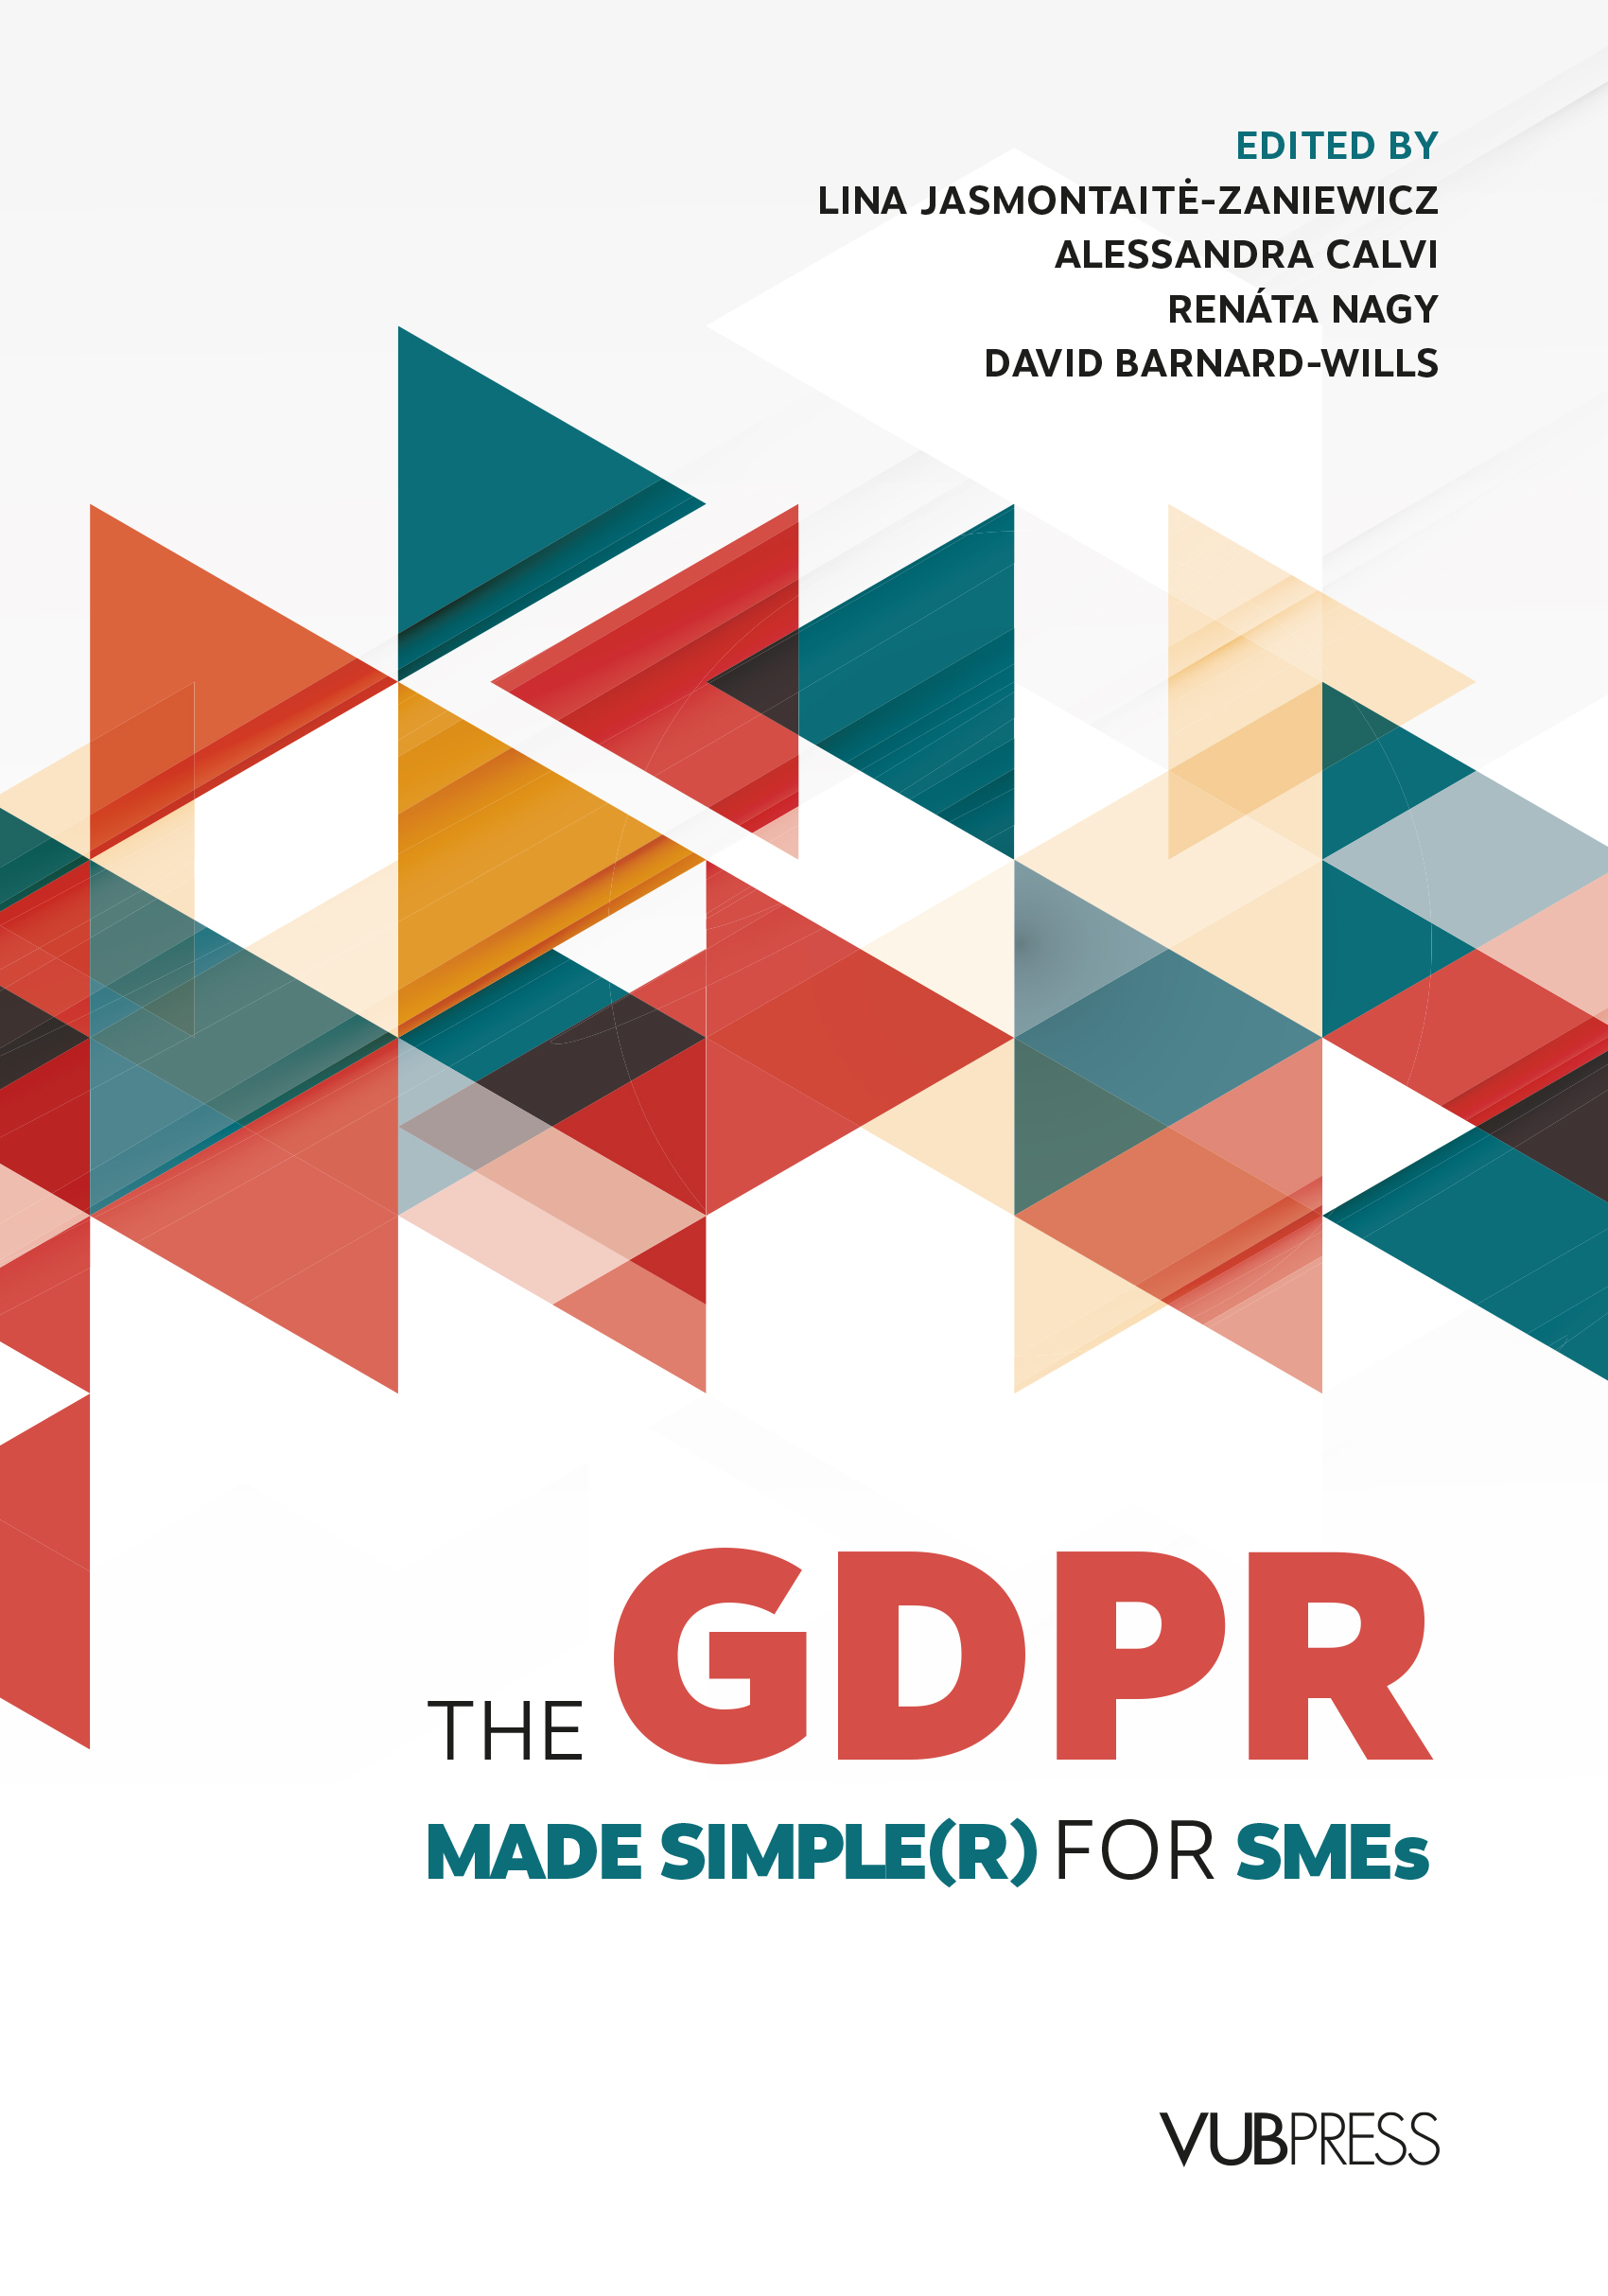 THE GDPR MADE SIMPLE(R) FOR SMES